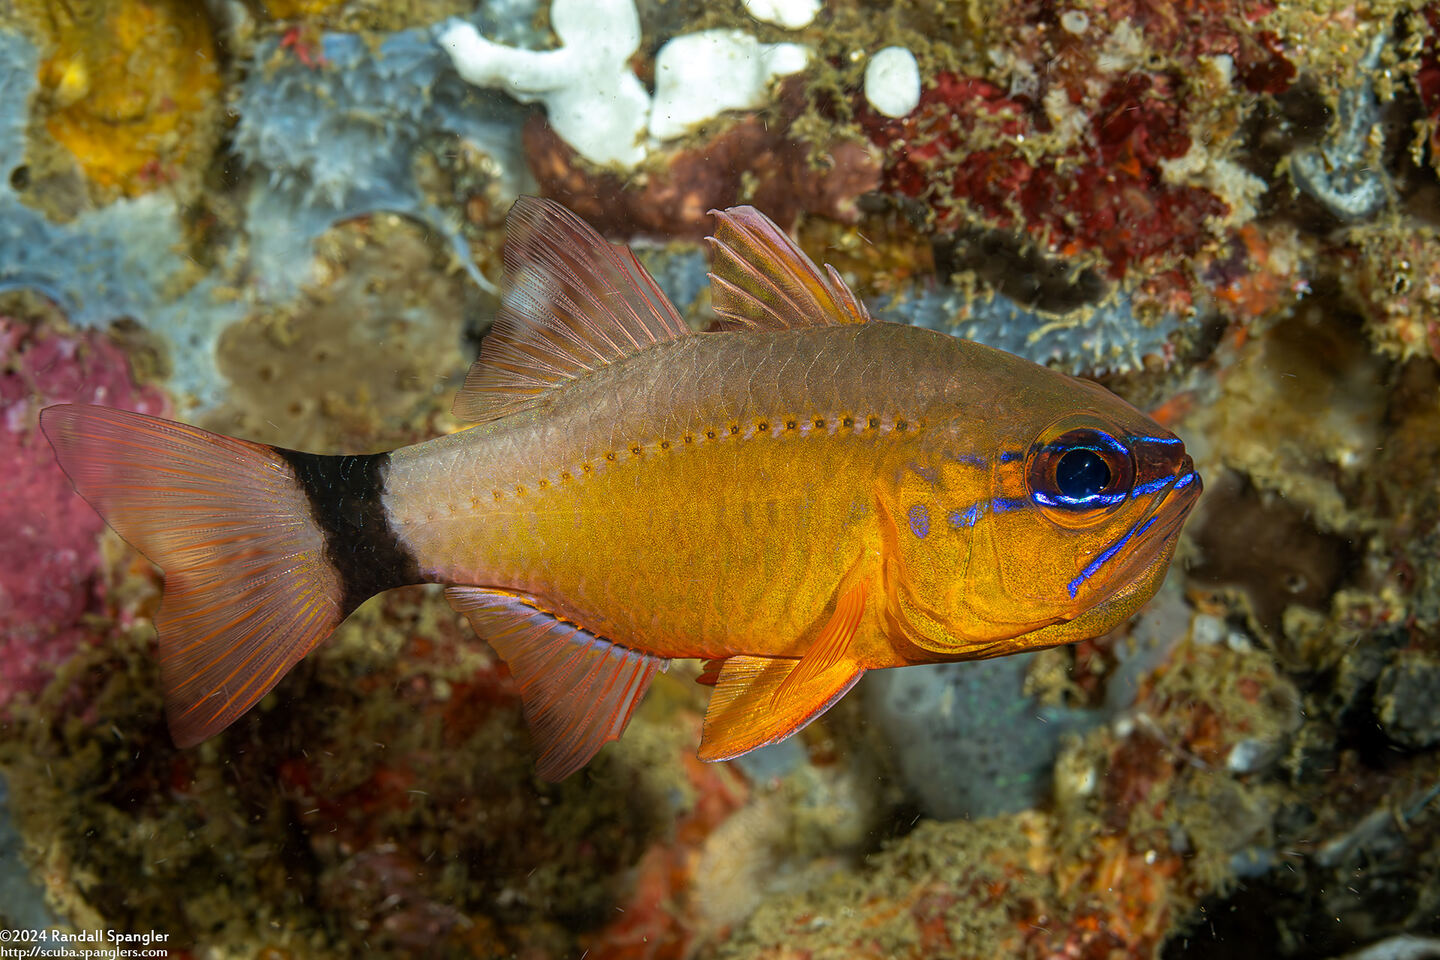 Ostorhinchus aureus (Ringtailed Cardinalfish); With eggs in its mouth